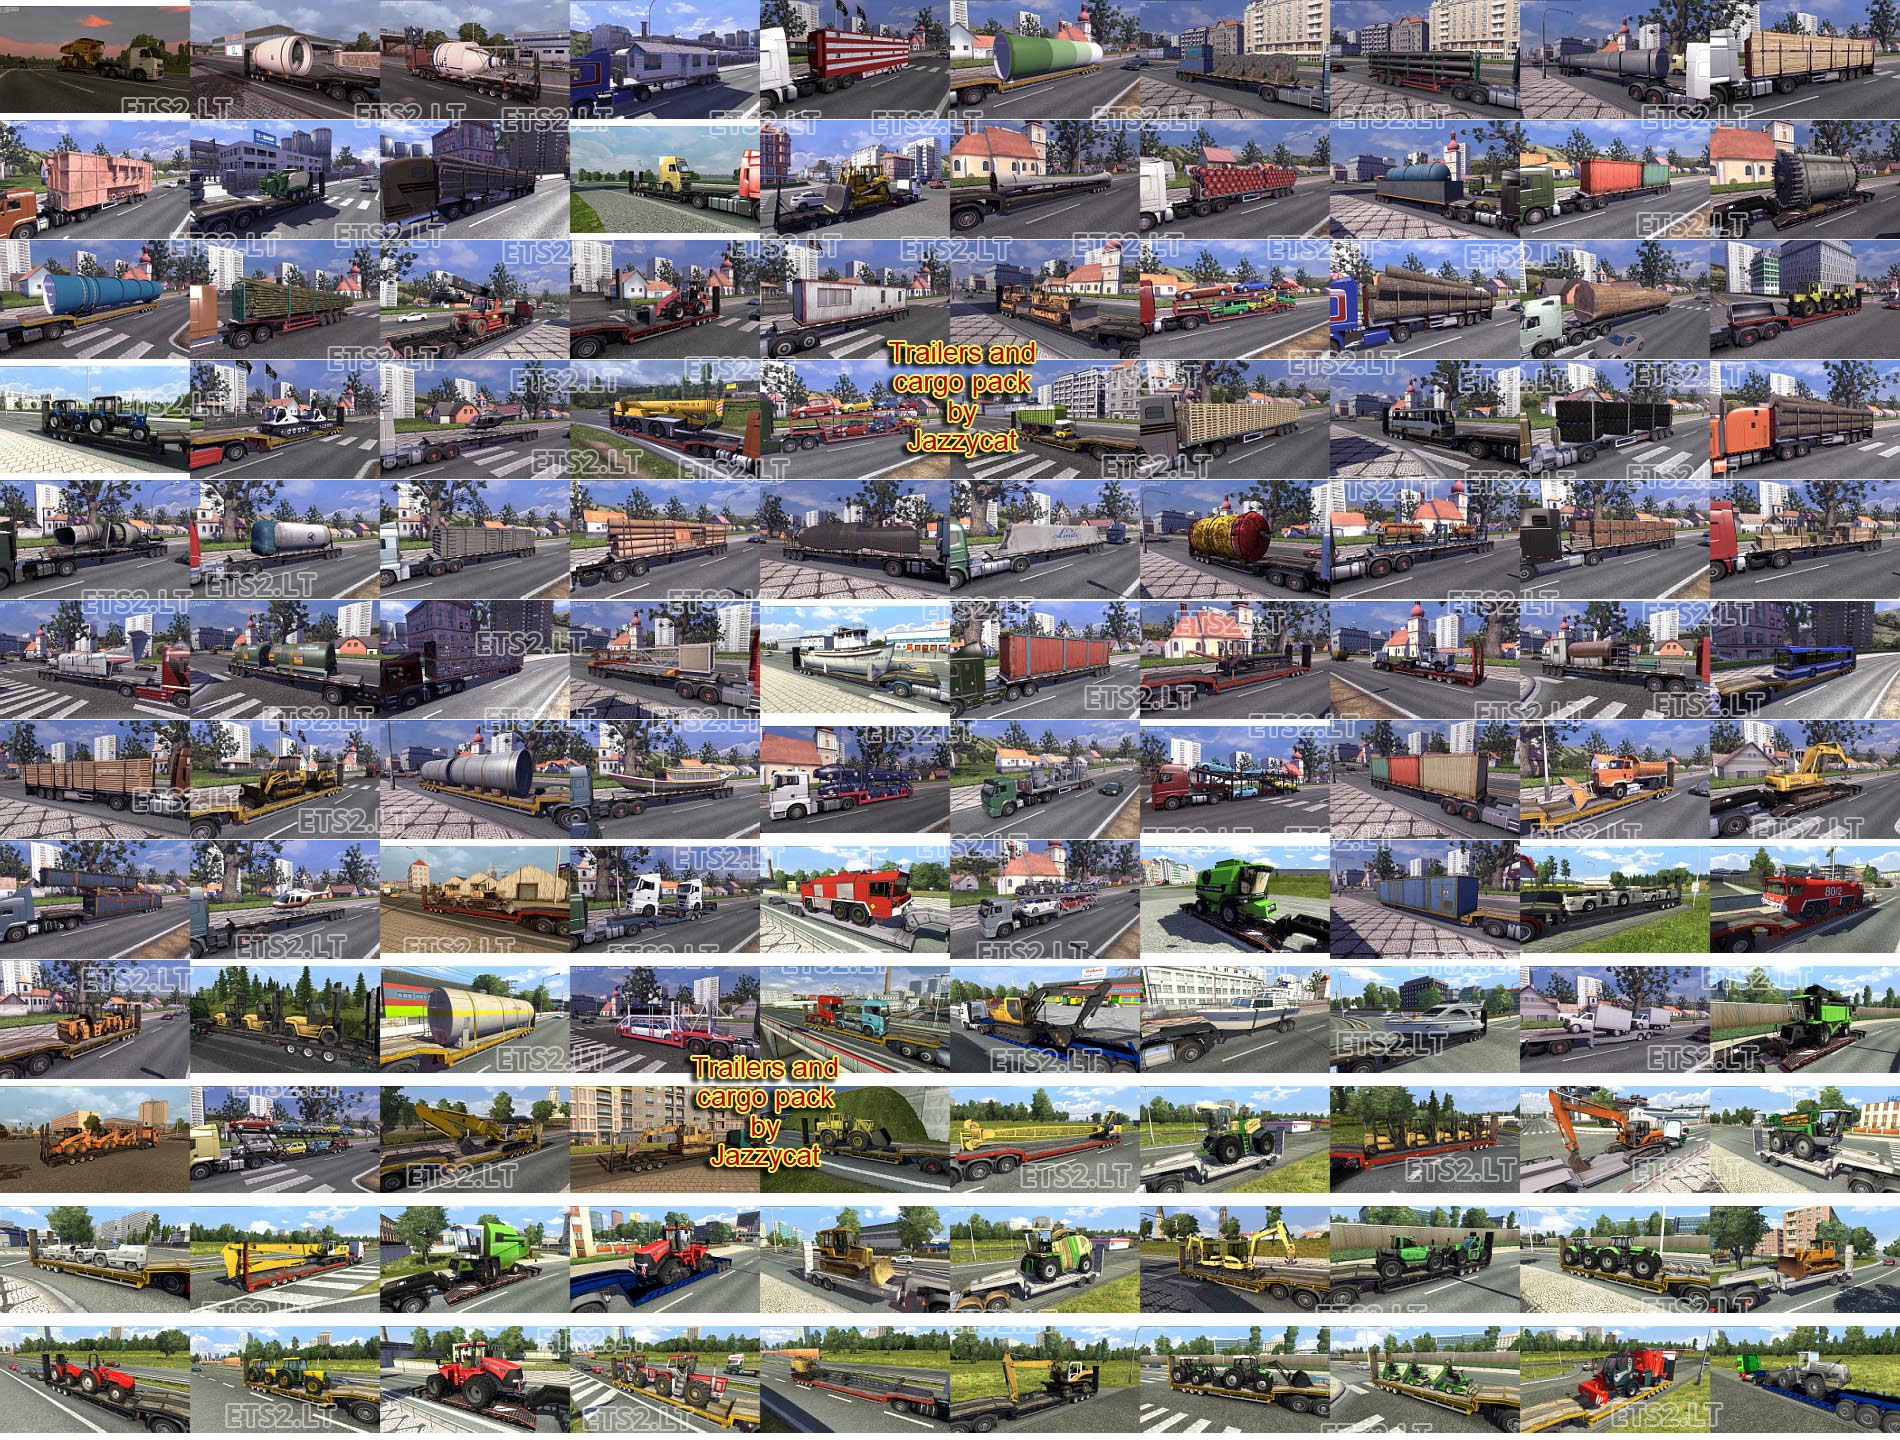 Mod adds about 130 trailers and cargos. All standalone. Noting